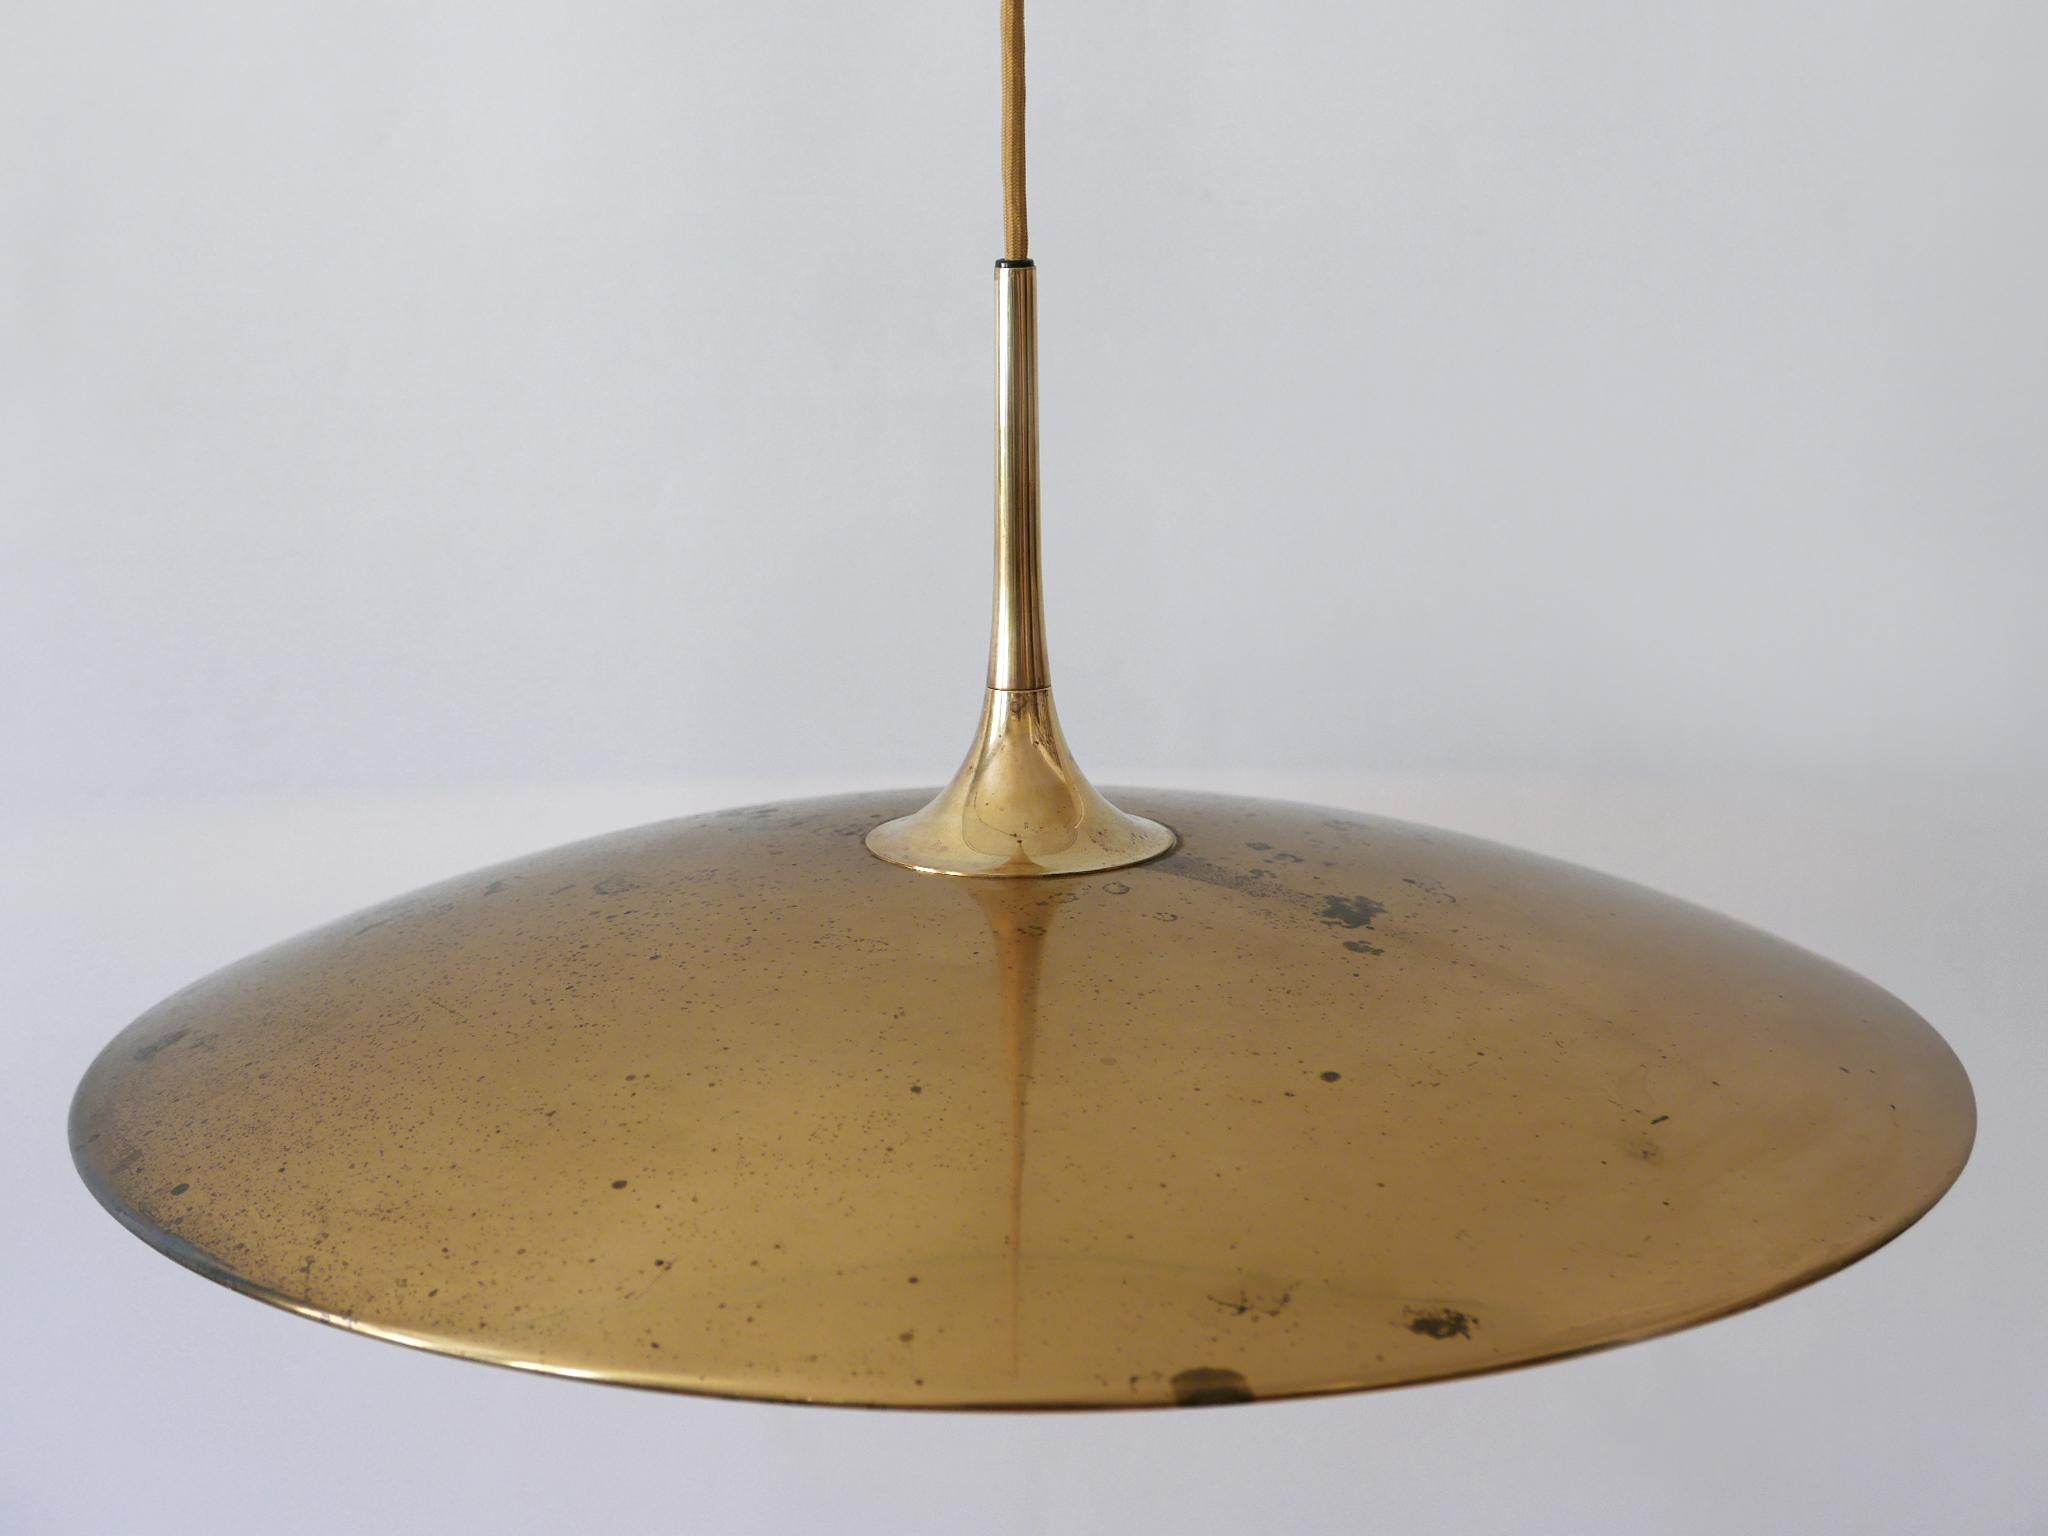 Rare Early Brass Counterweight Pendant Lamp 'Onos 55' by Florian Schulz 1960s 2